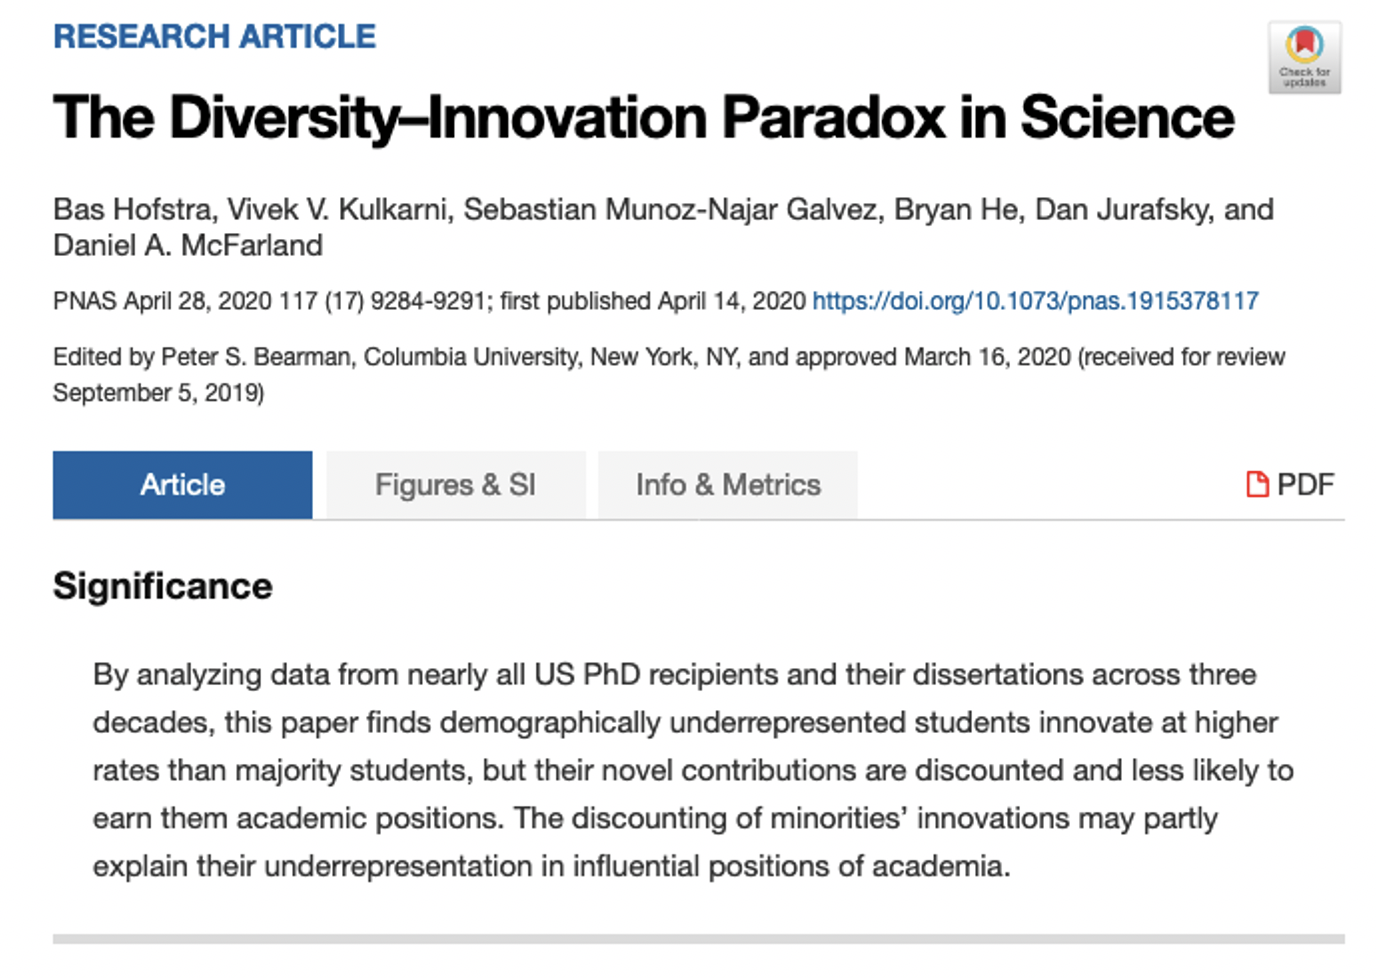 Screen shot of research article: The Diversity-Innovation Paradox in Science